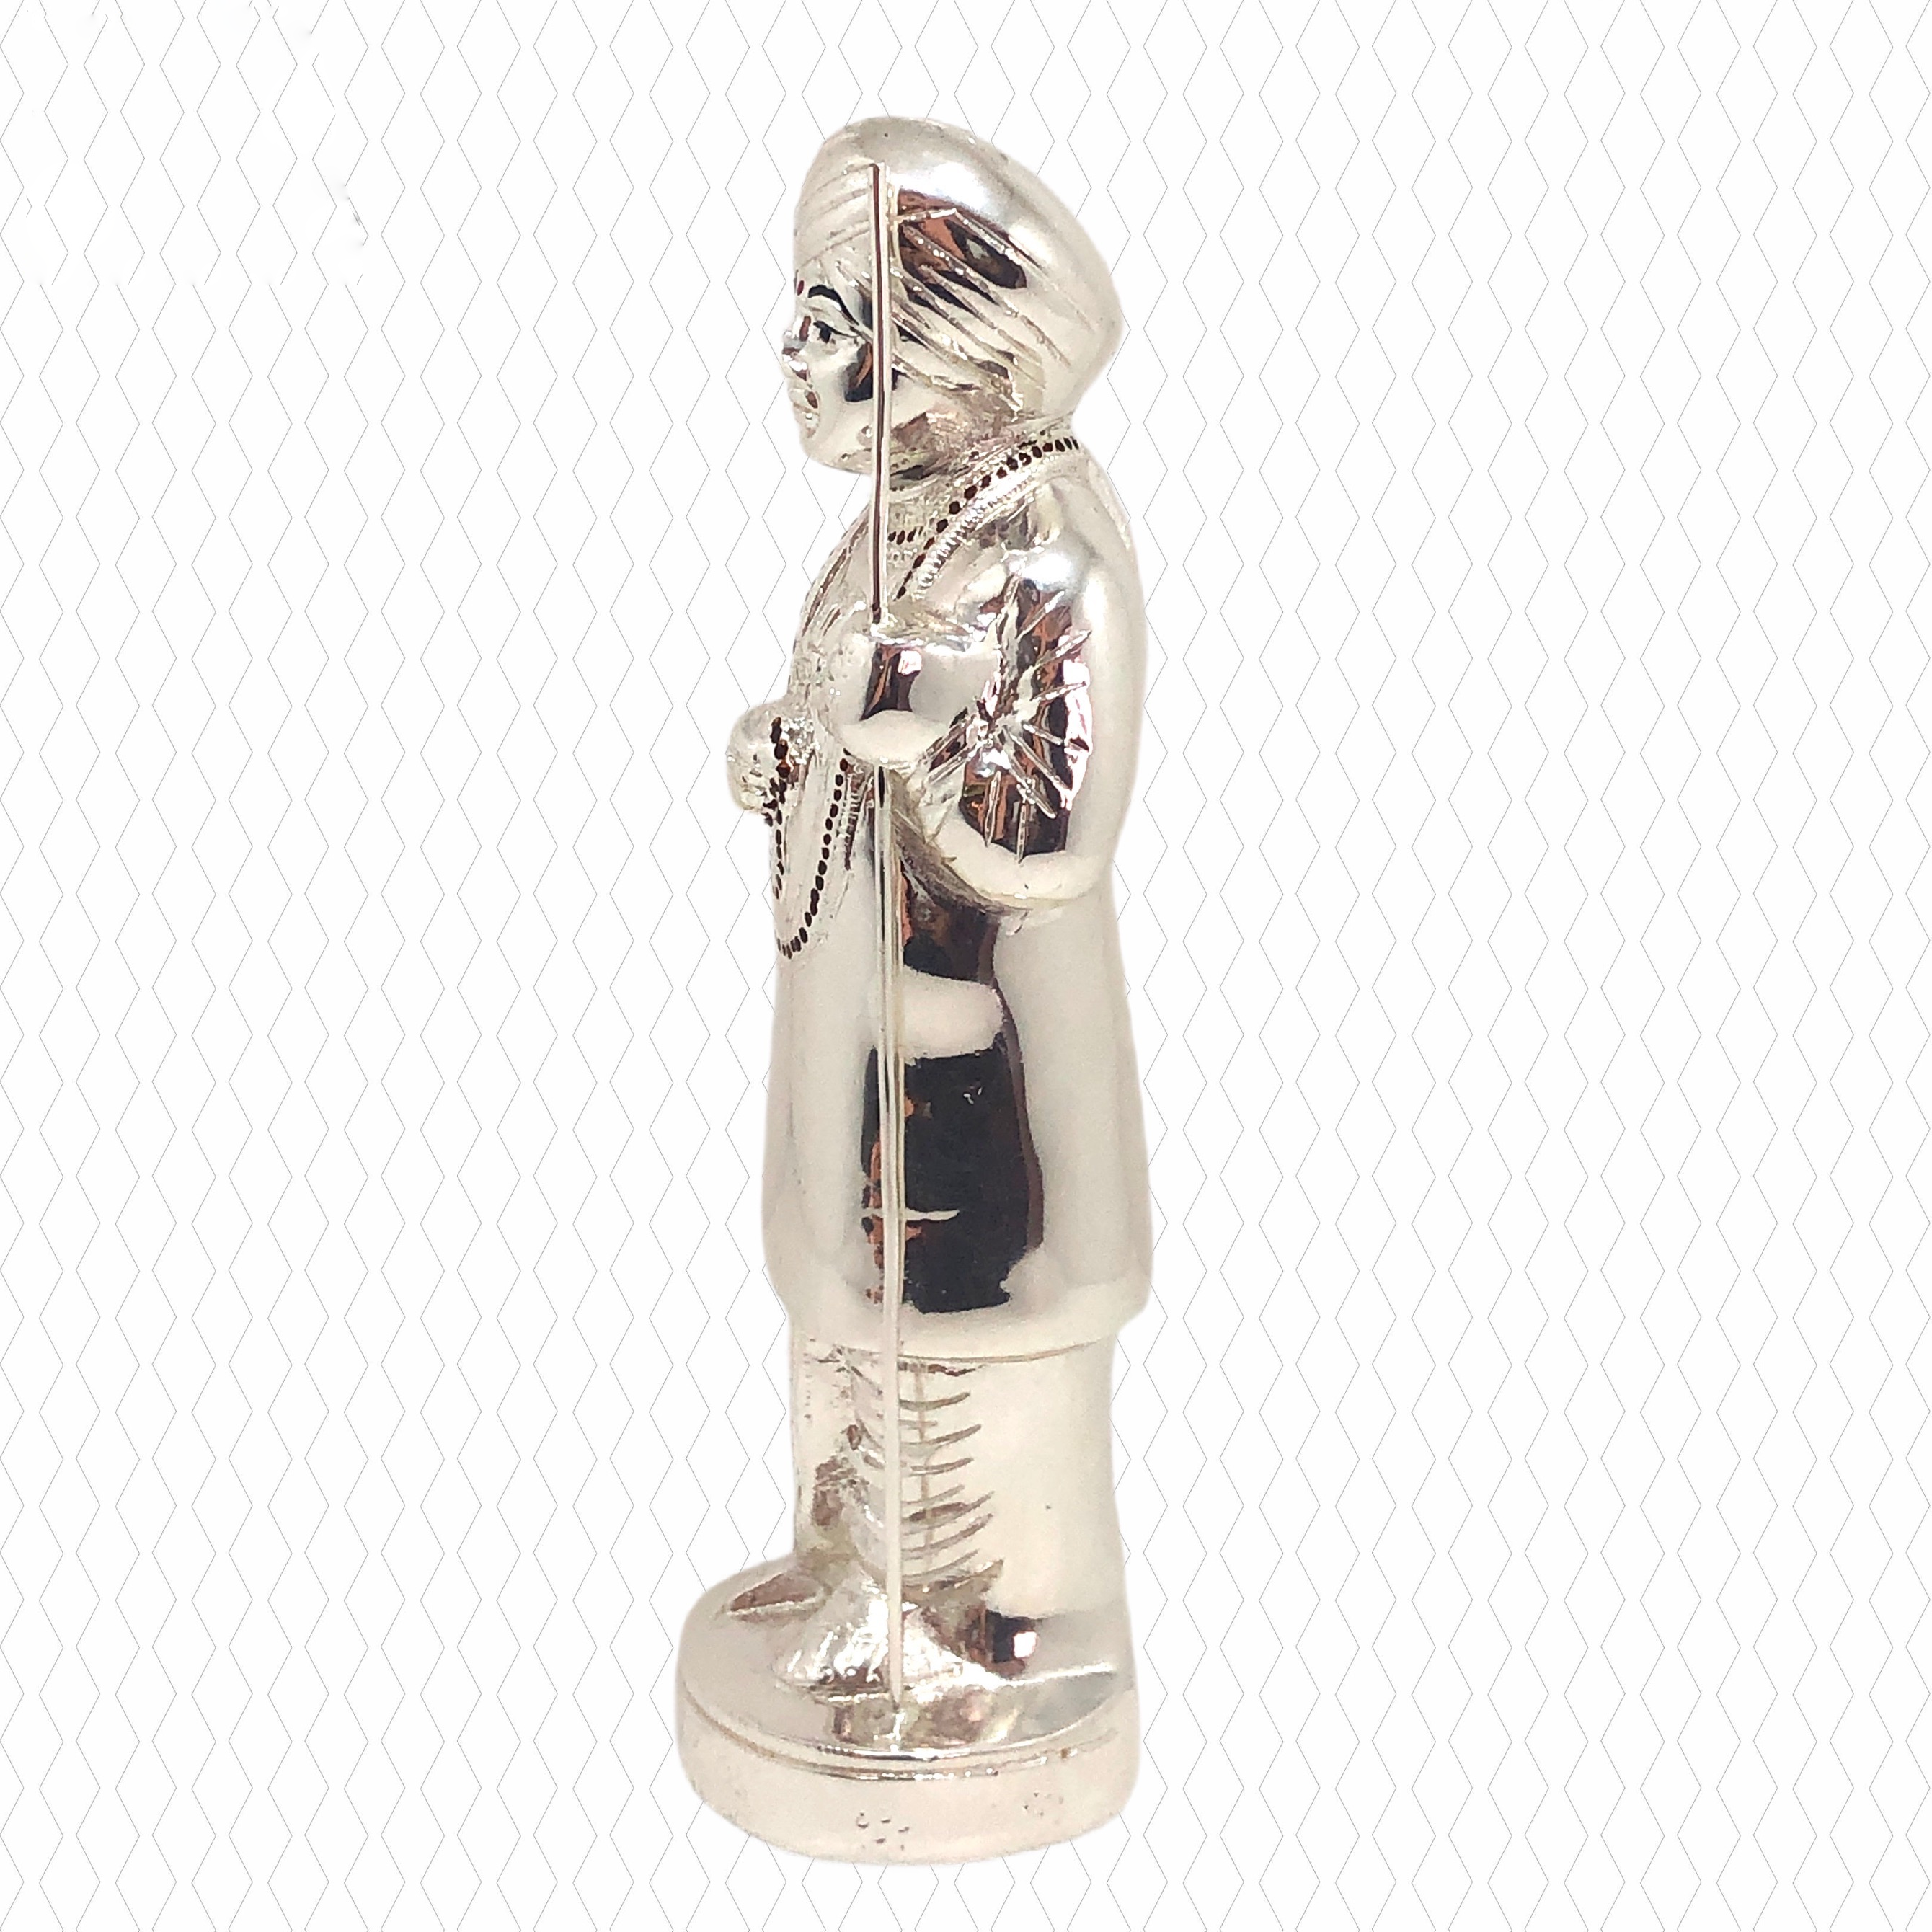 999 Fine Silver Plated Hindu Goddess Jalaram Bapa Idol / Murti for Puja Room, Temple, Meditation, Office, Business & Home Decoration Gift Collection any many more